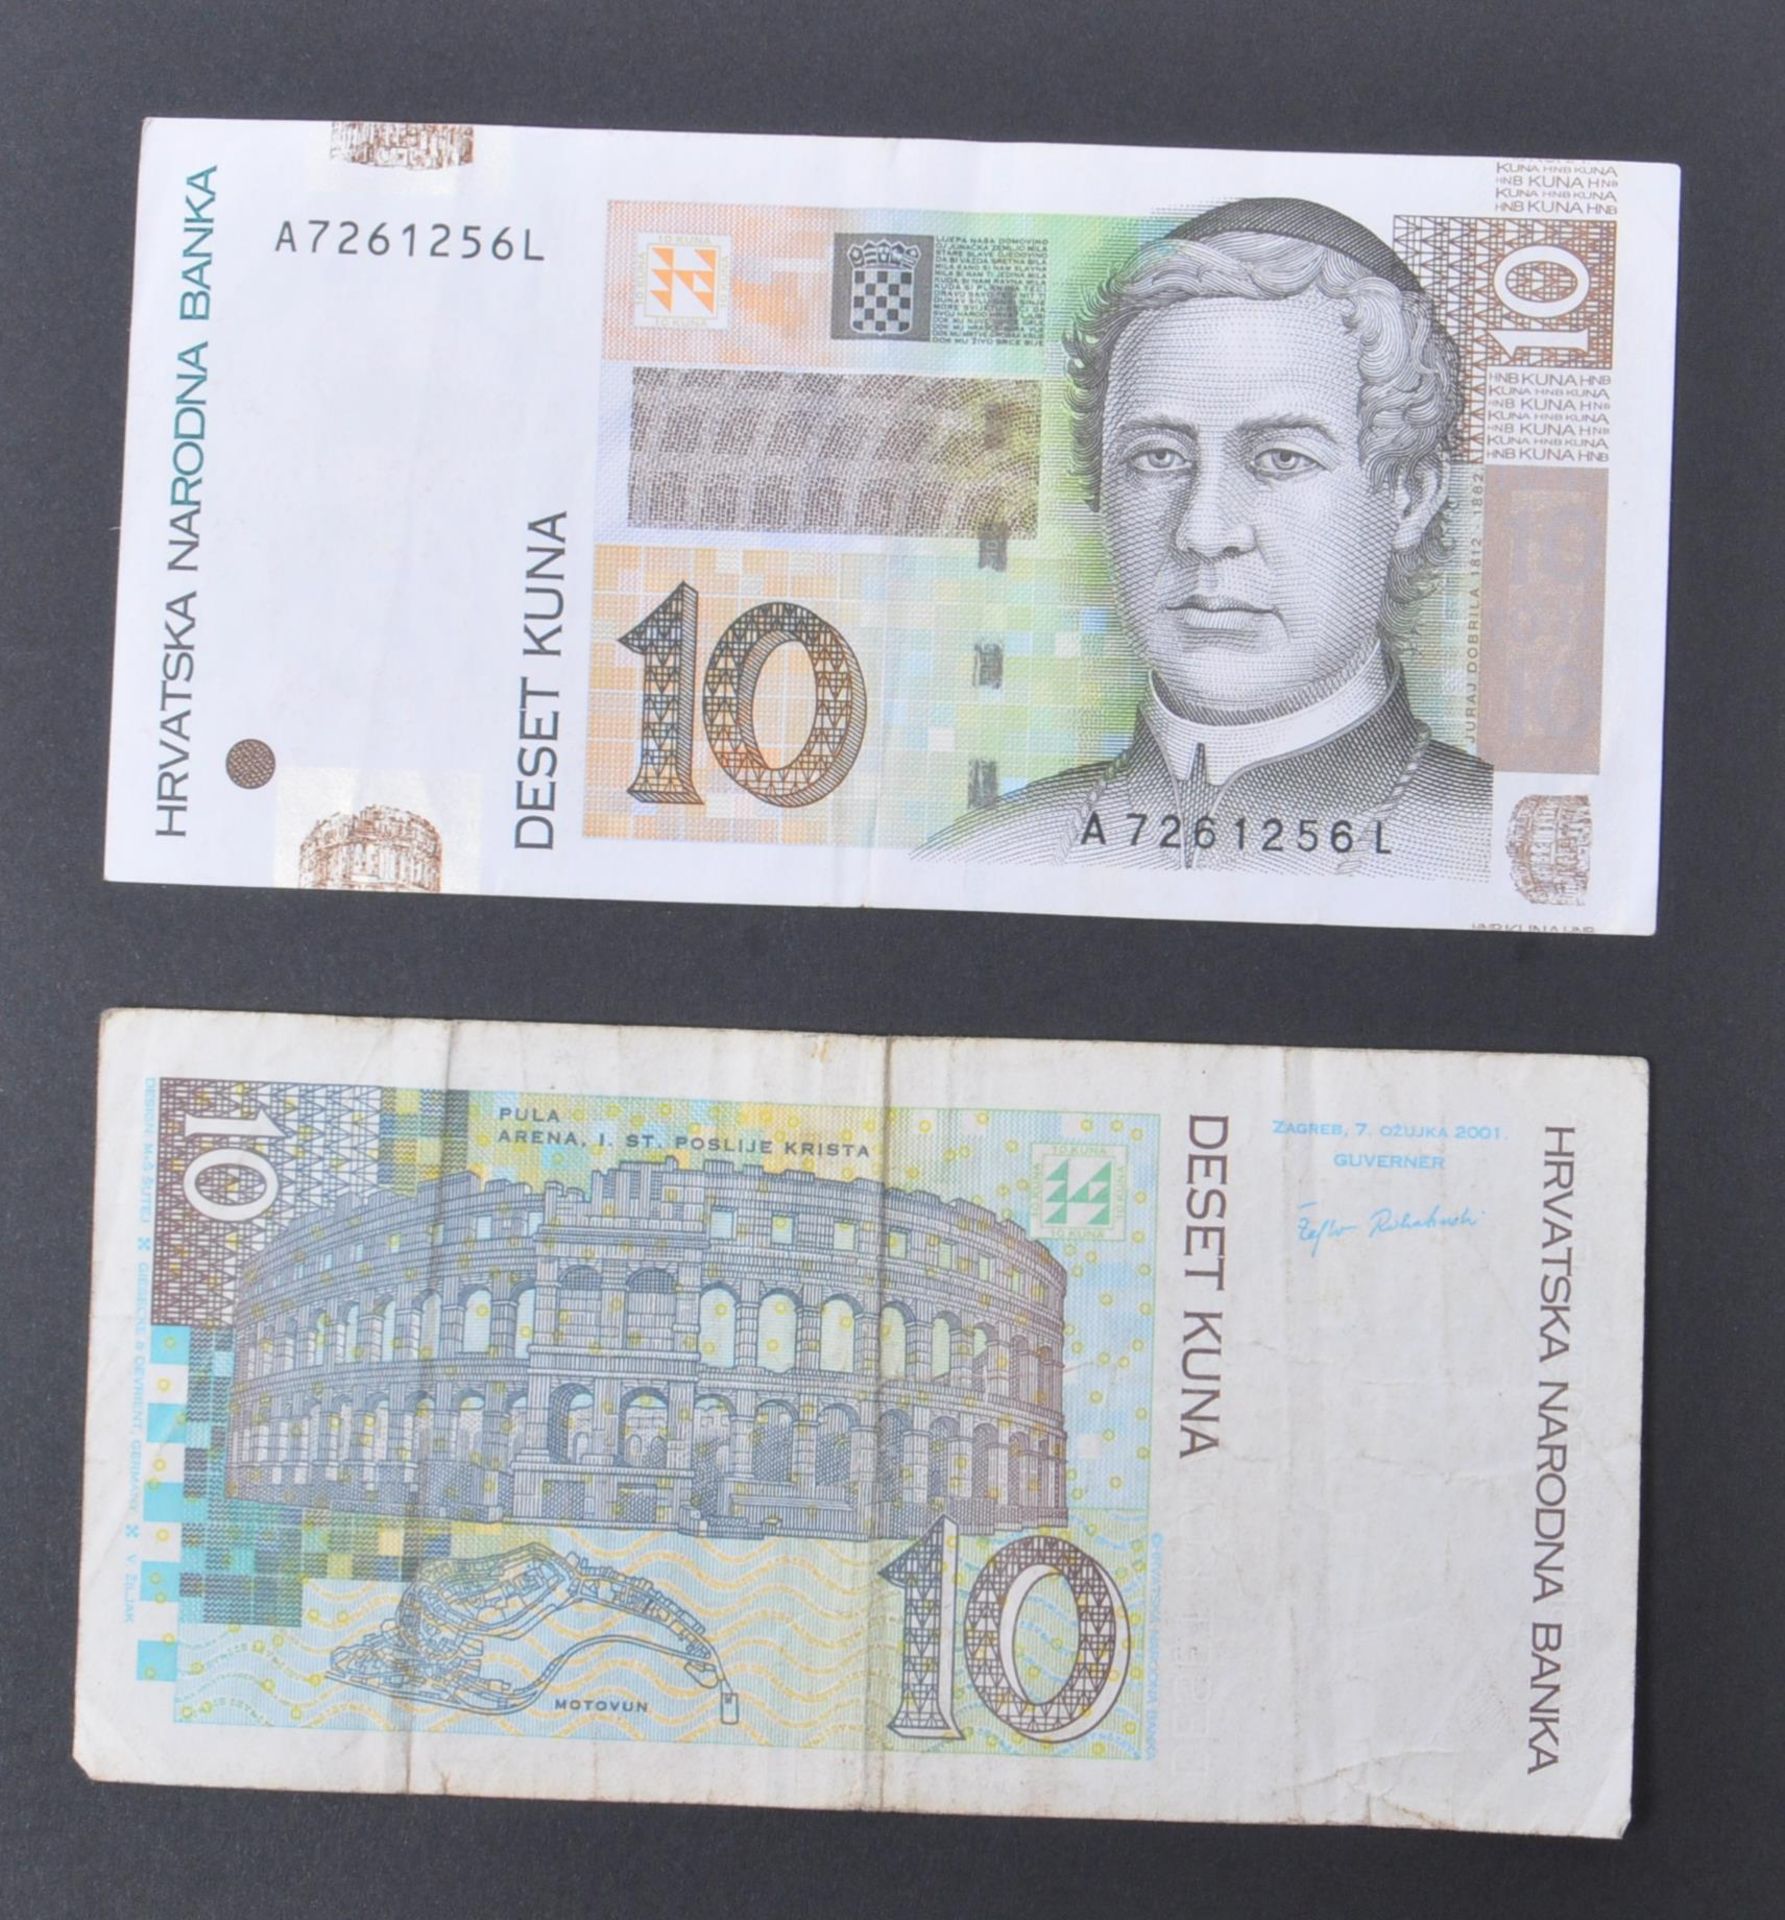 INTERNATIONAL MOSTLY UNCIRCULATED BANK NOTES - EUROPE - Image 21 of 30